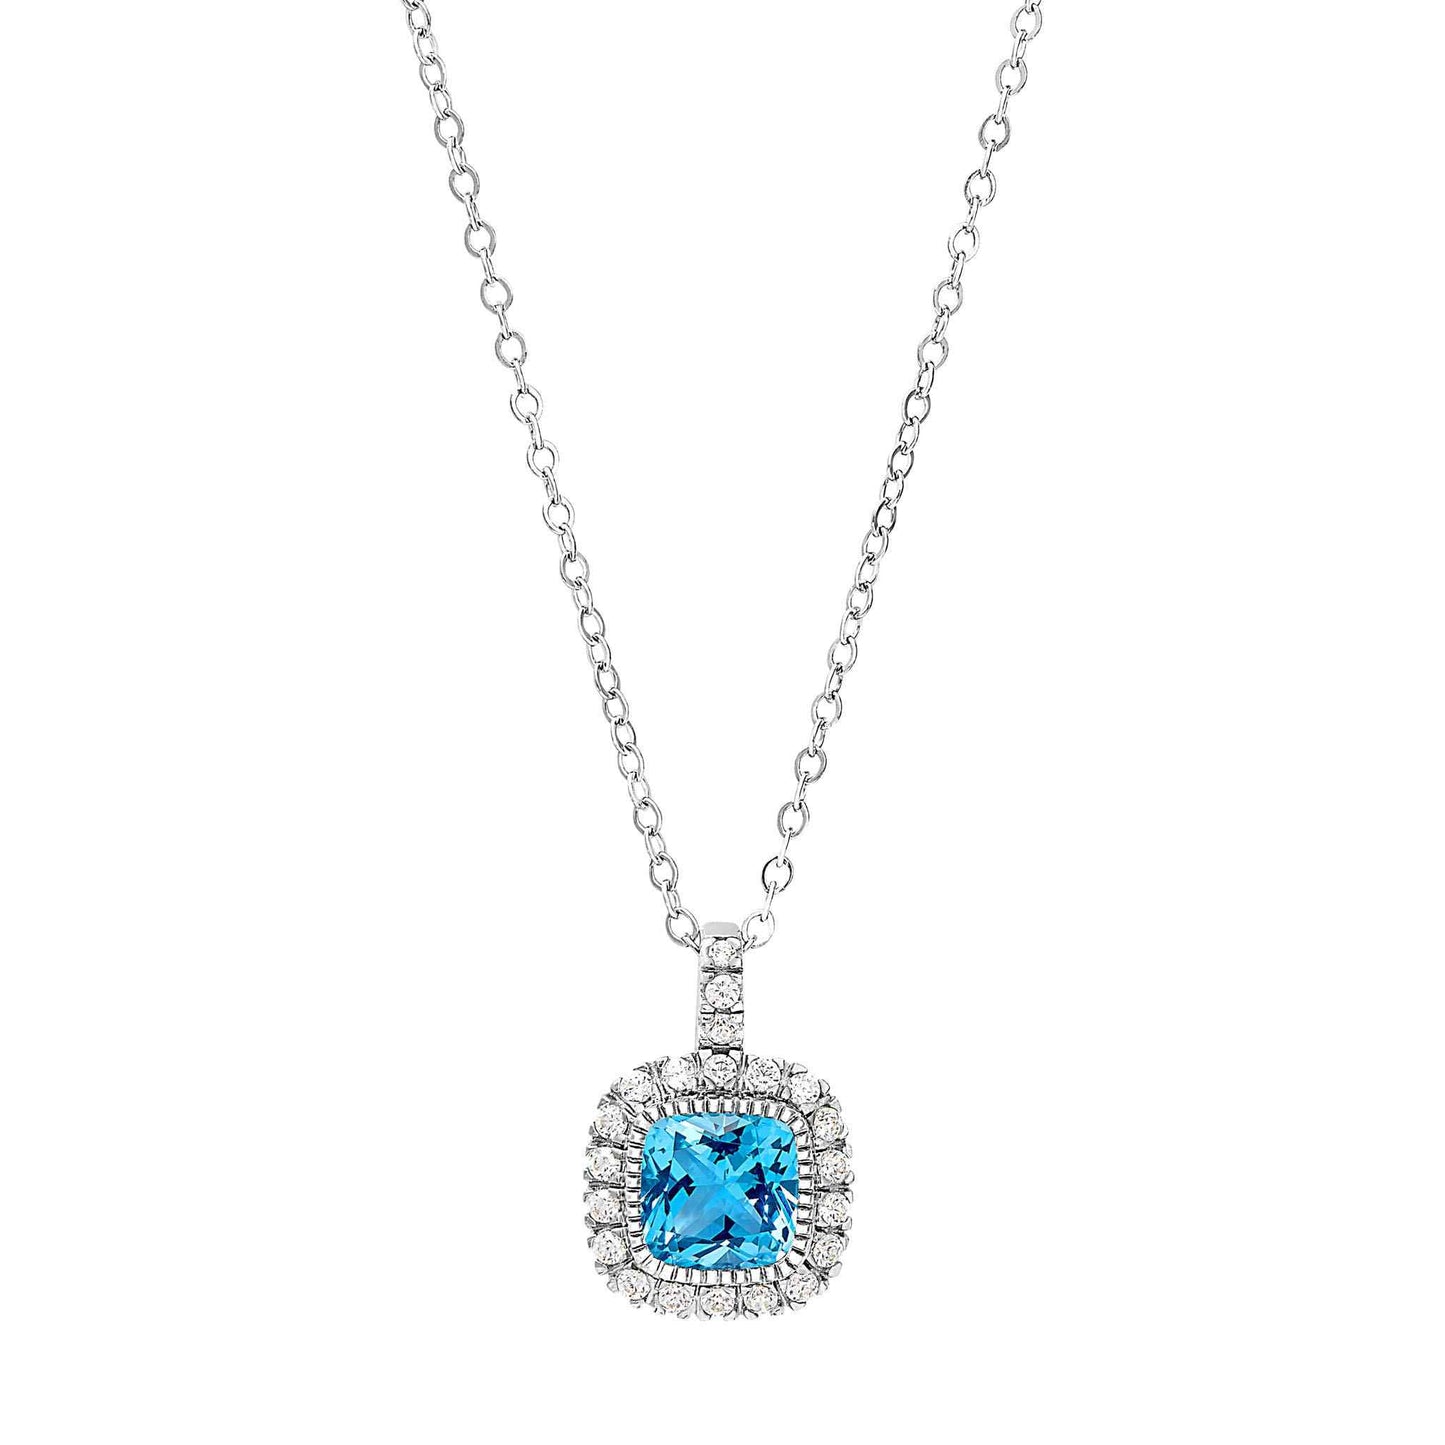 A cushion birthstone necklace with simulated diamonds displayed on a neutral white background.